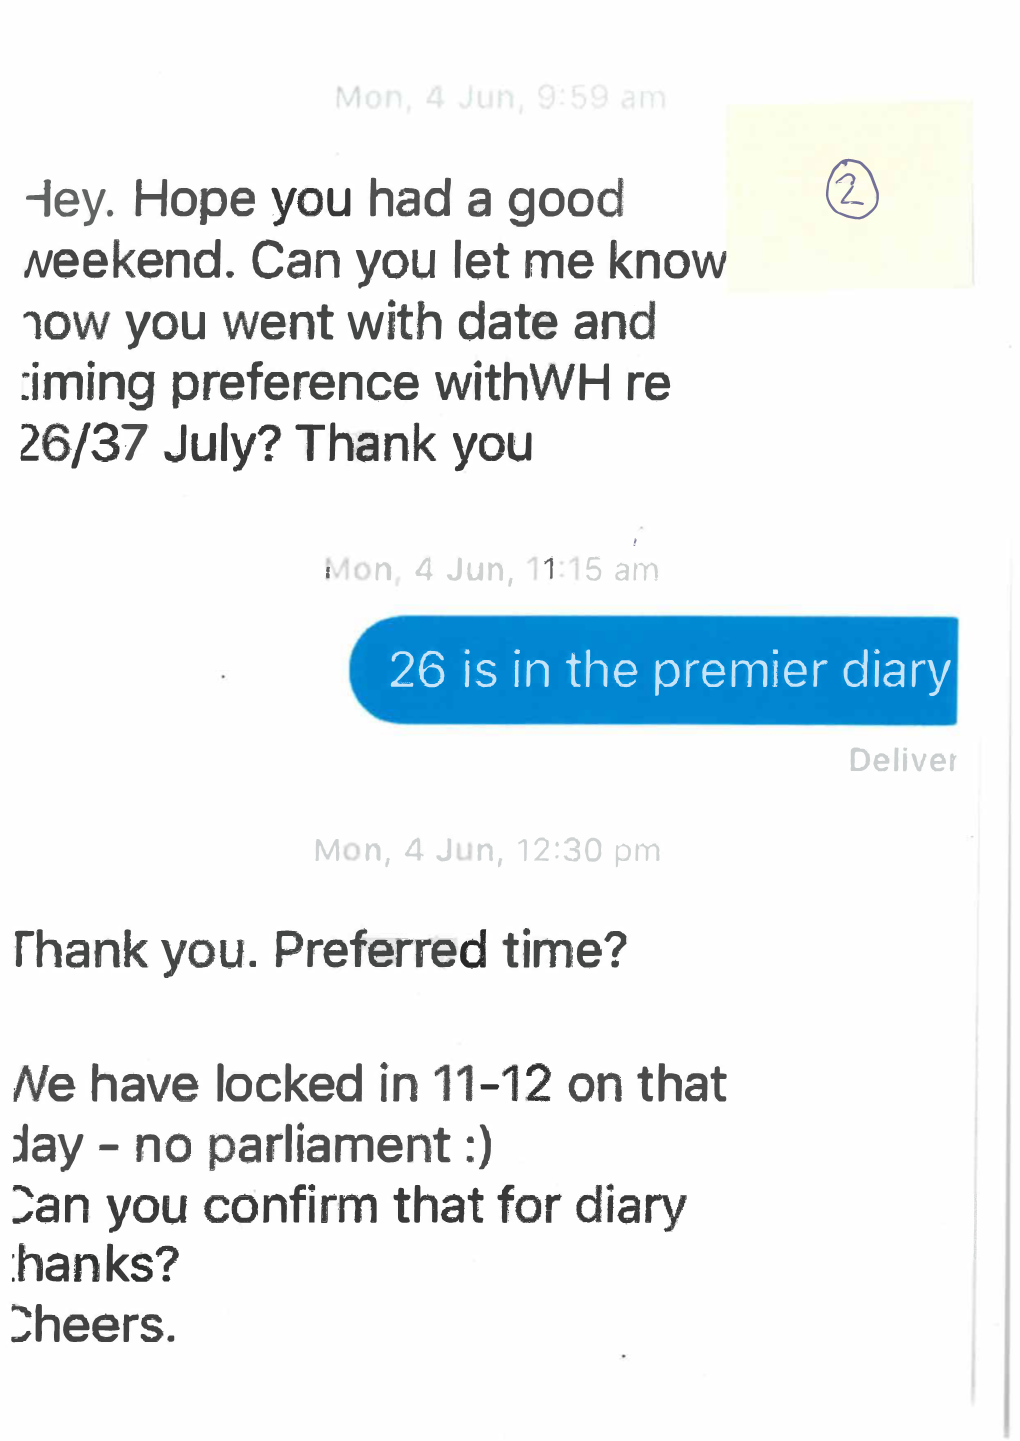 Correspondence Between the Premier's Office and Cricket